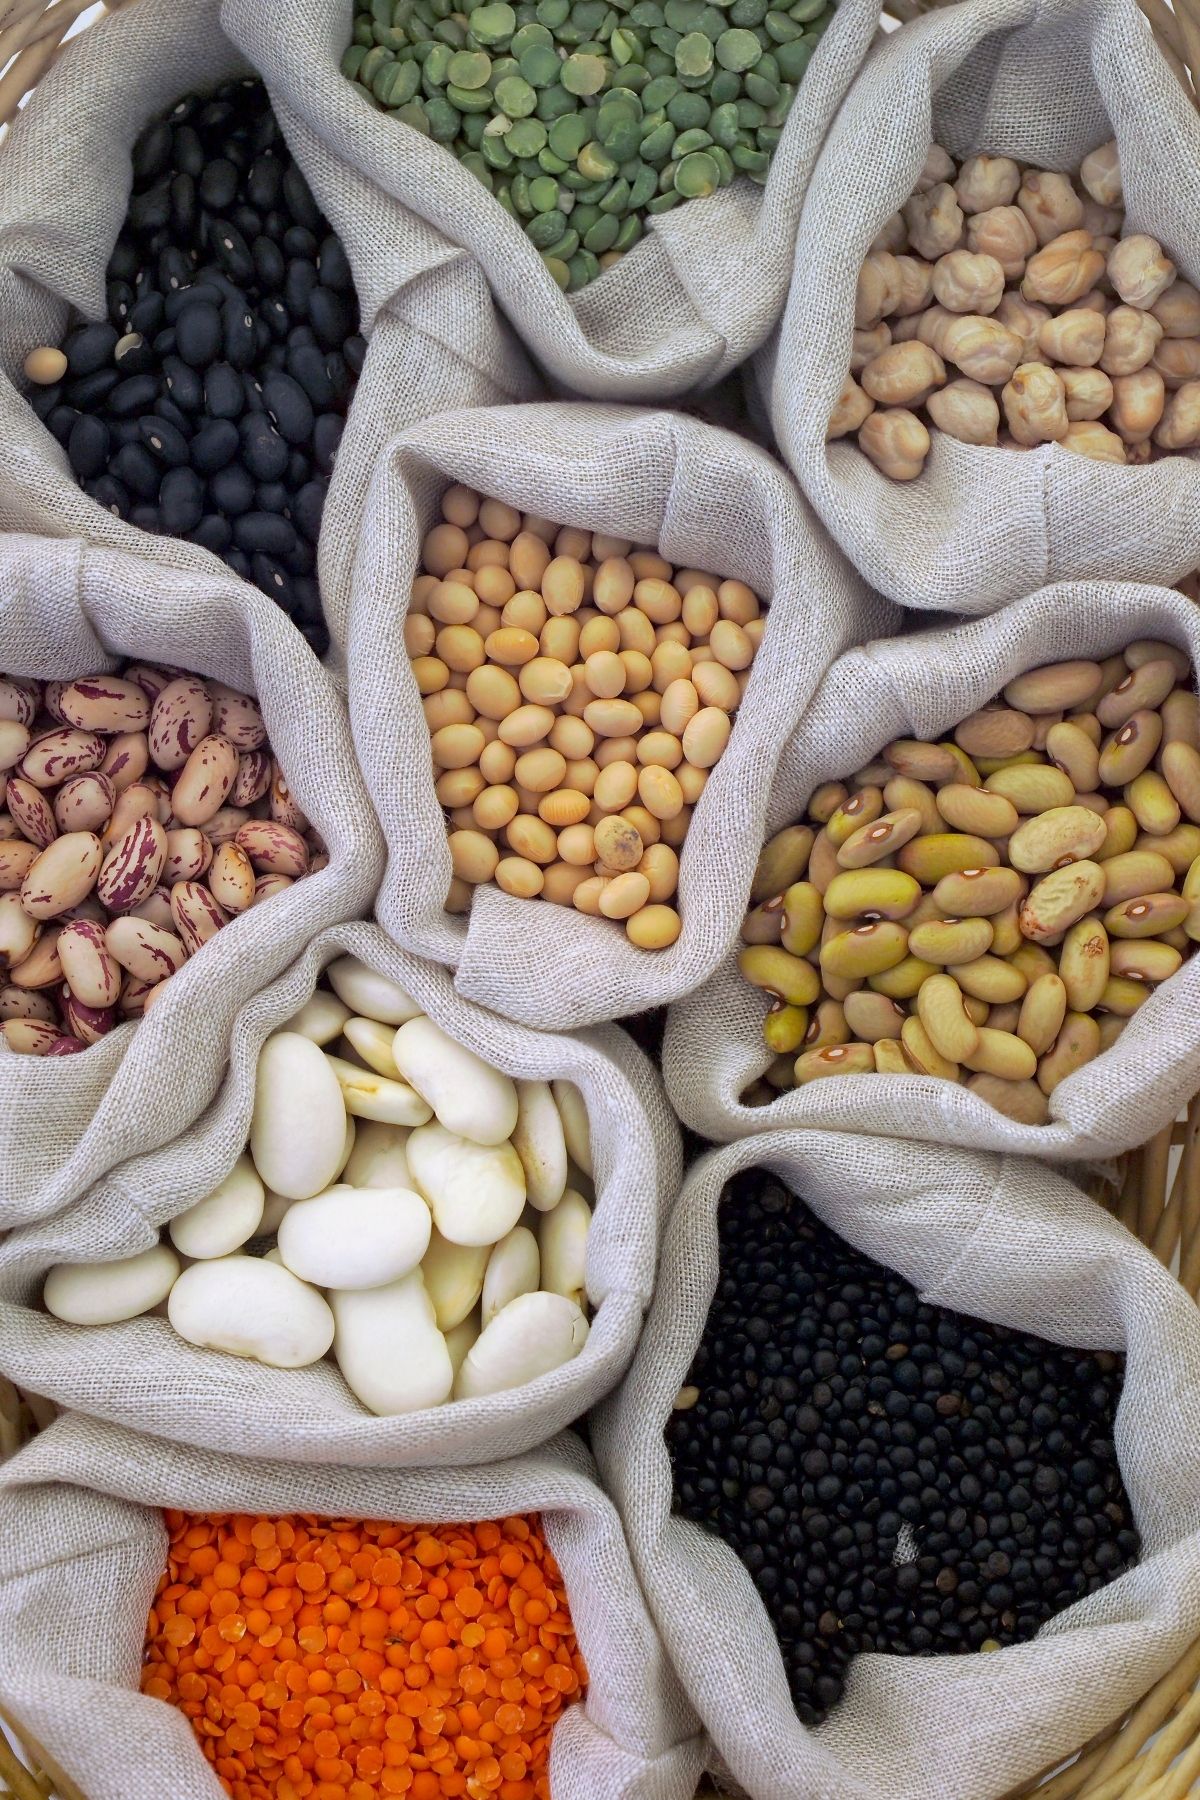 Bags of different types of legumes.